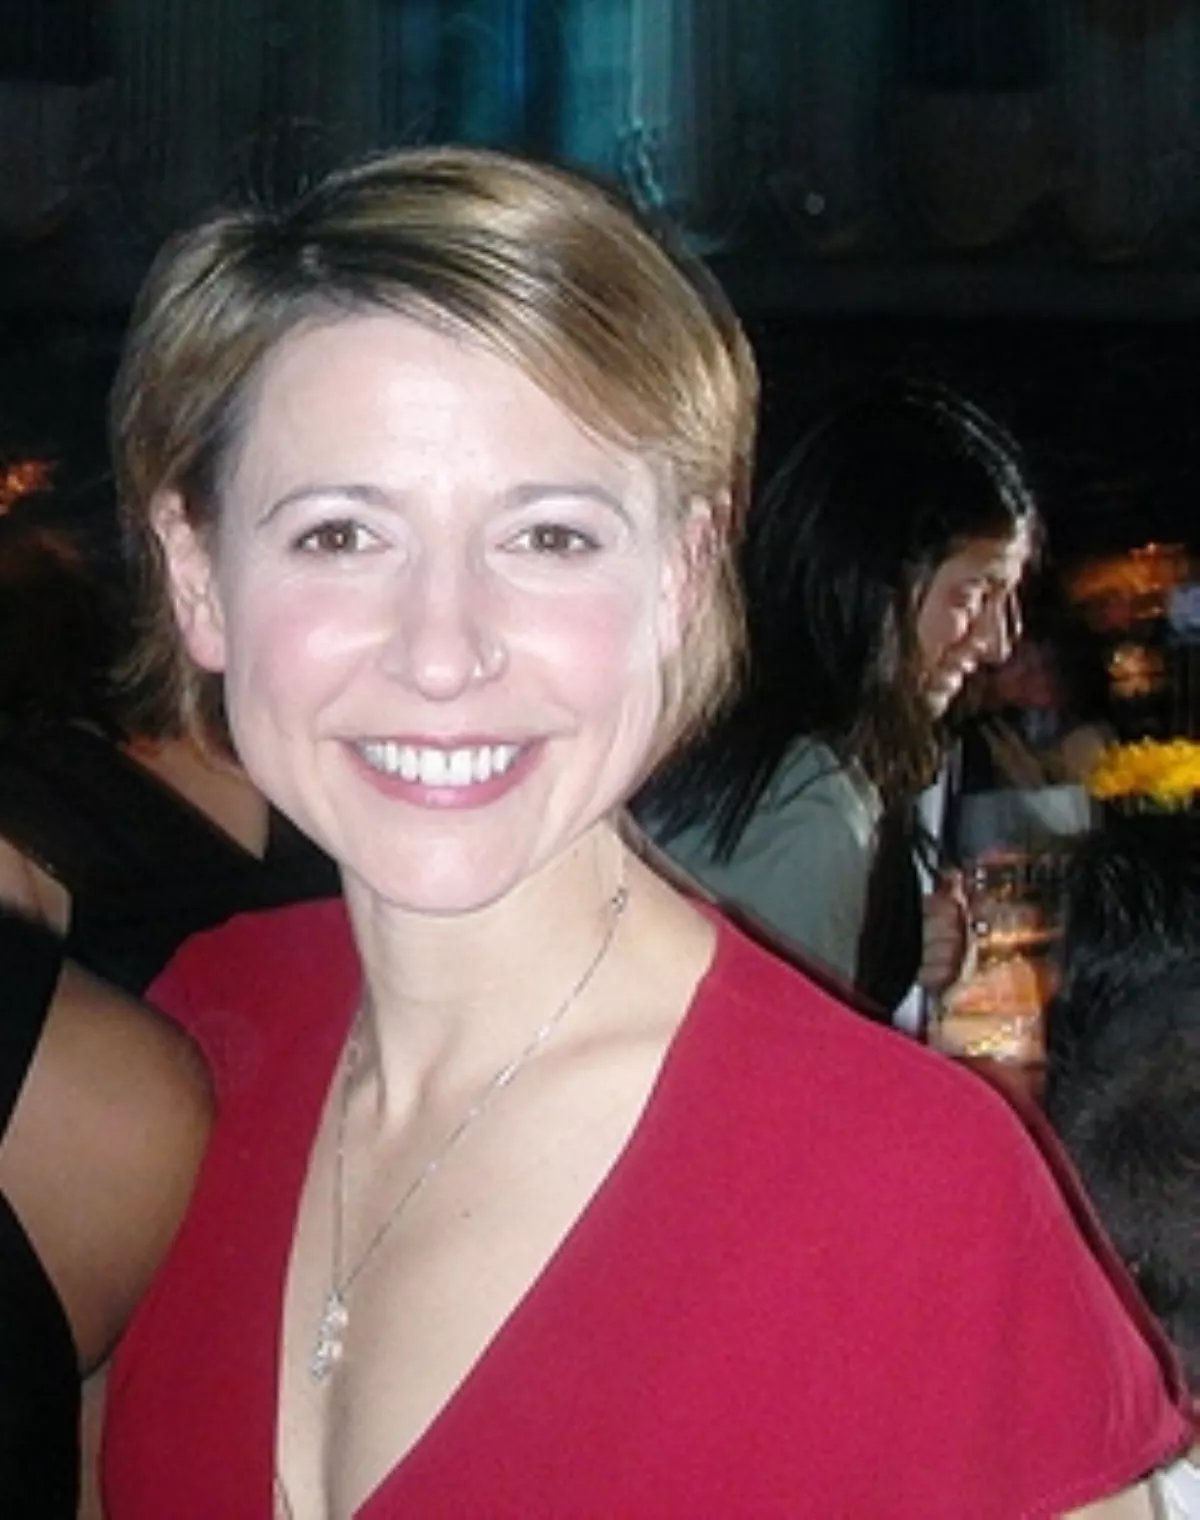 11 Facts About Samantha Brown | FactSnippet